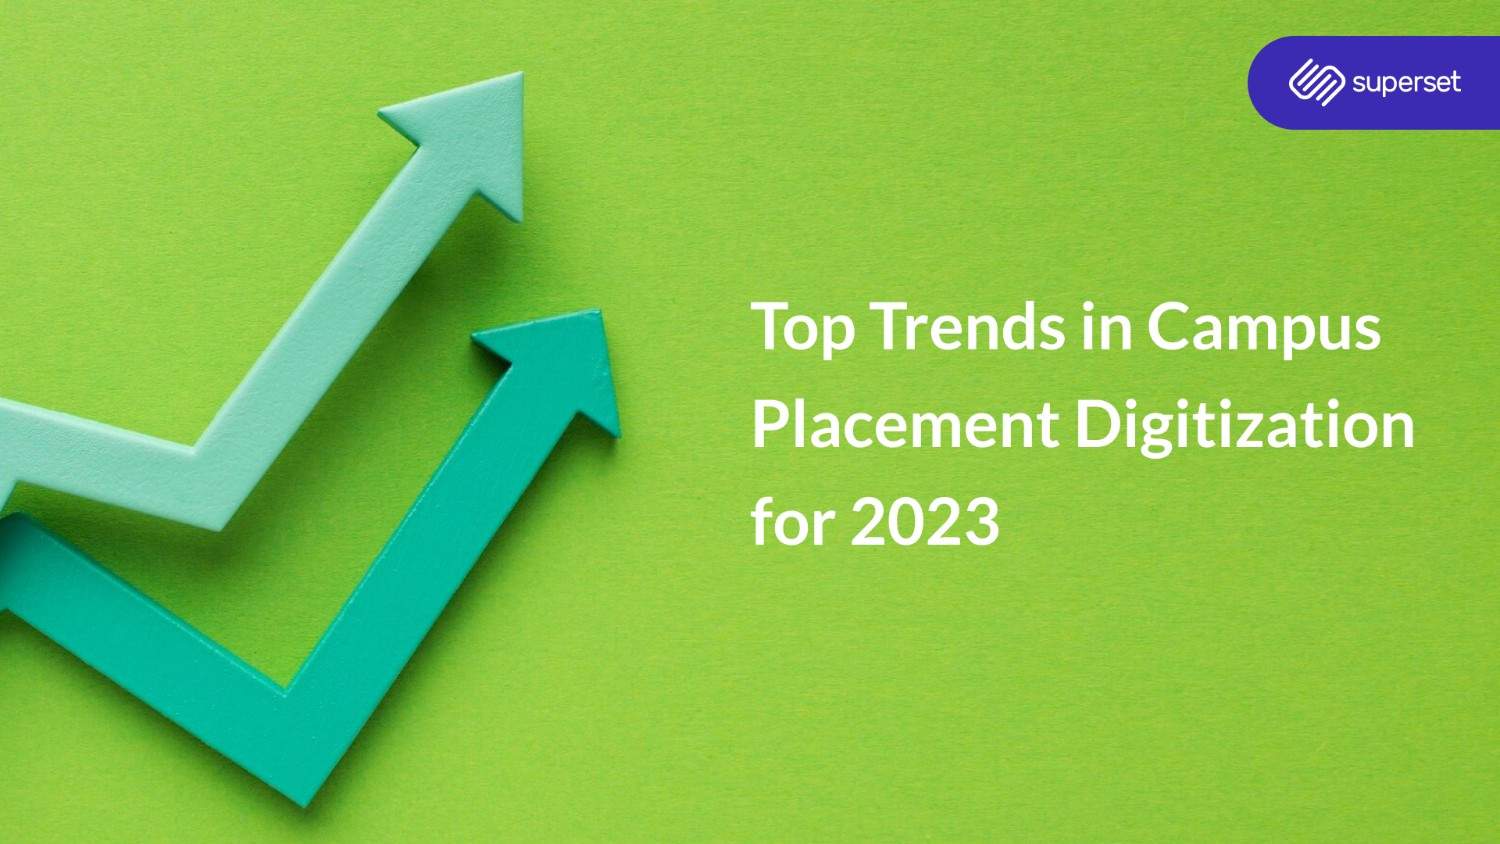 Top trends in campus placements